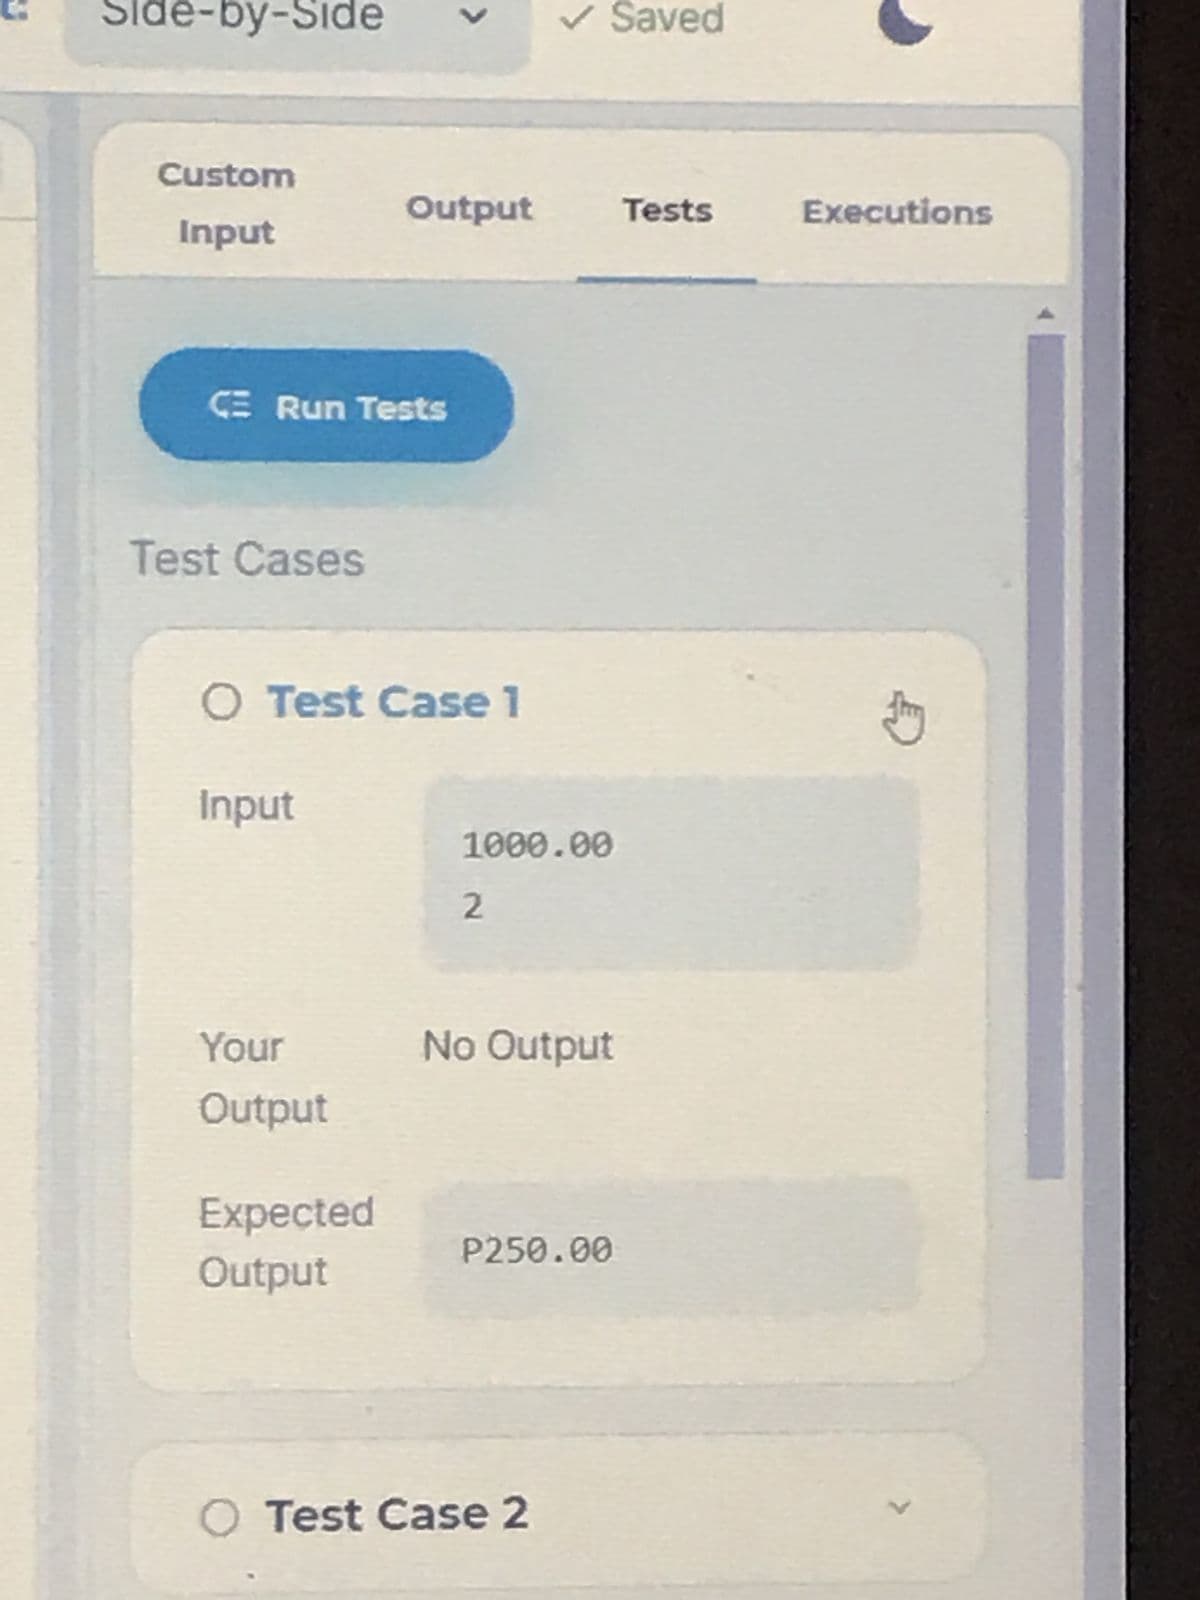 Side-by-Side
Custom
Input
Output
CE Run Tests
Test Cases
O Test Case 1
Input
Your
Output
Expected
Output
O Test Case 2
✓ Saved
Tests
1000.00
2
No Output
P250.00
Executions